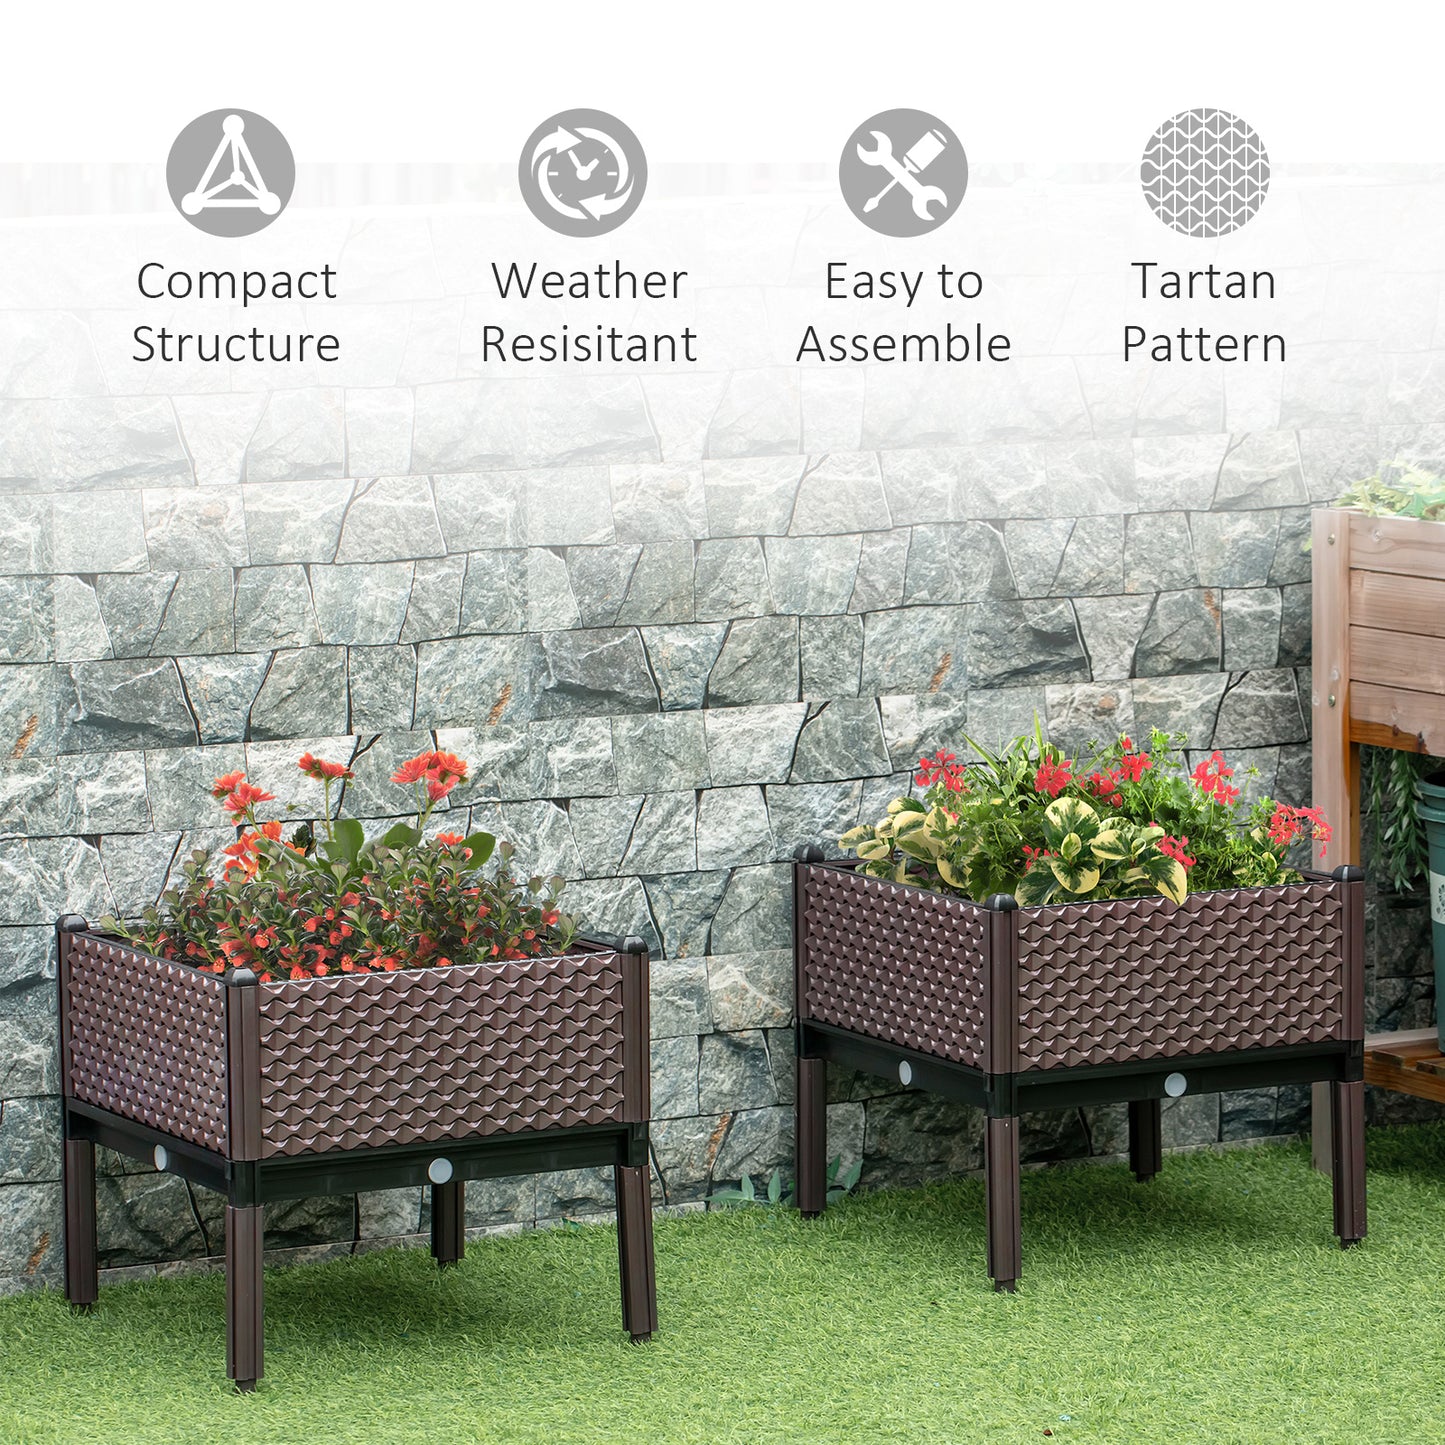 Outsunny 50cm x 50cm x 46.5cm Set of 2 Garden Raised Bed, Elevated Planter Box, Flower Vegetables Planting Container with Self-Watering Design